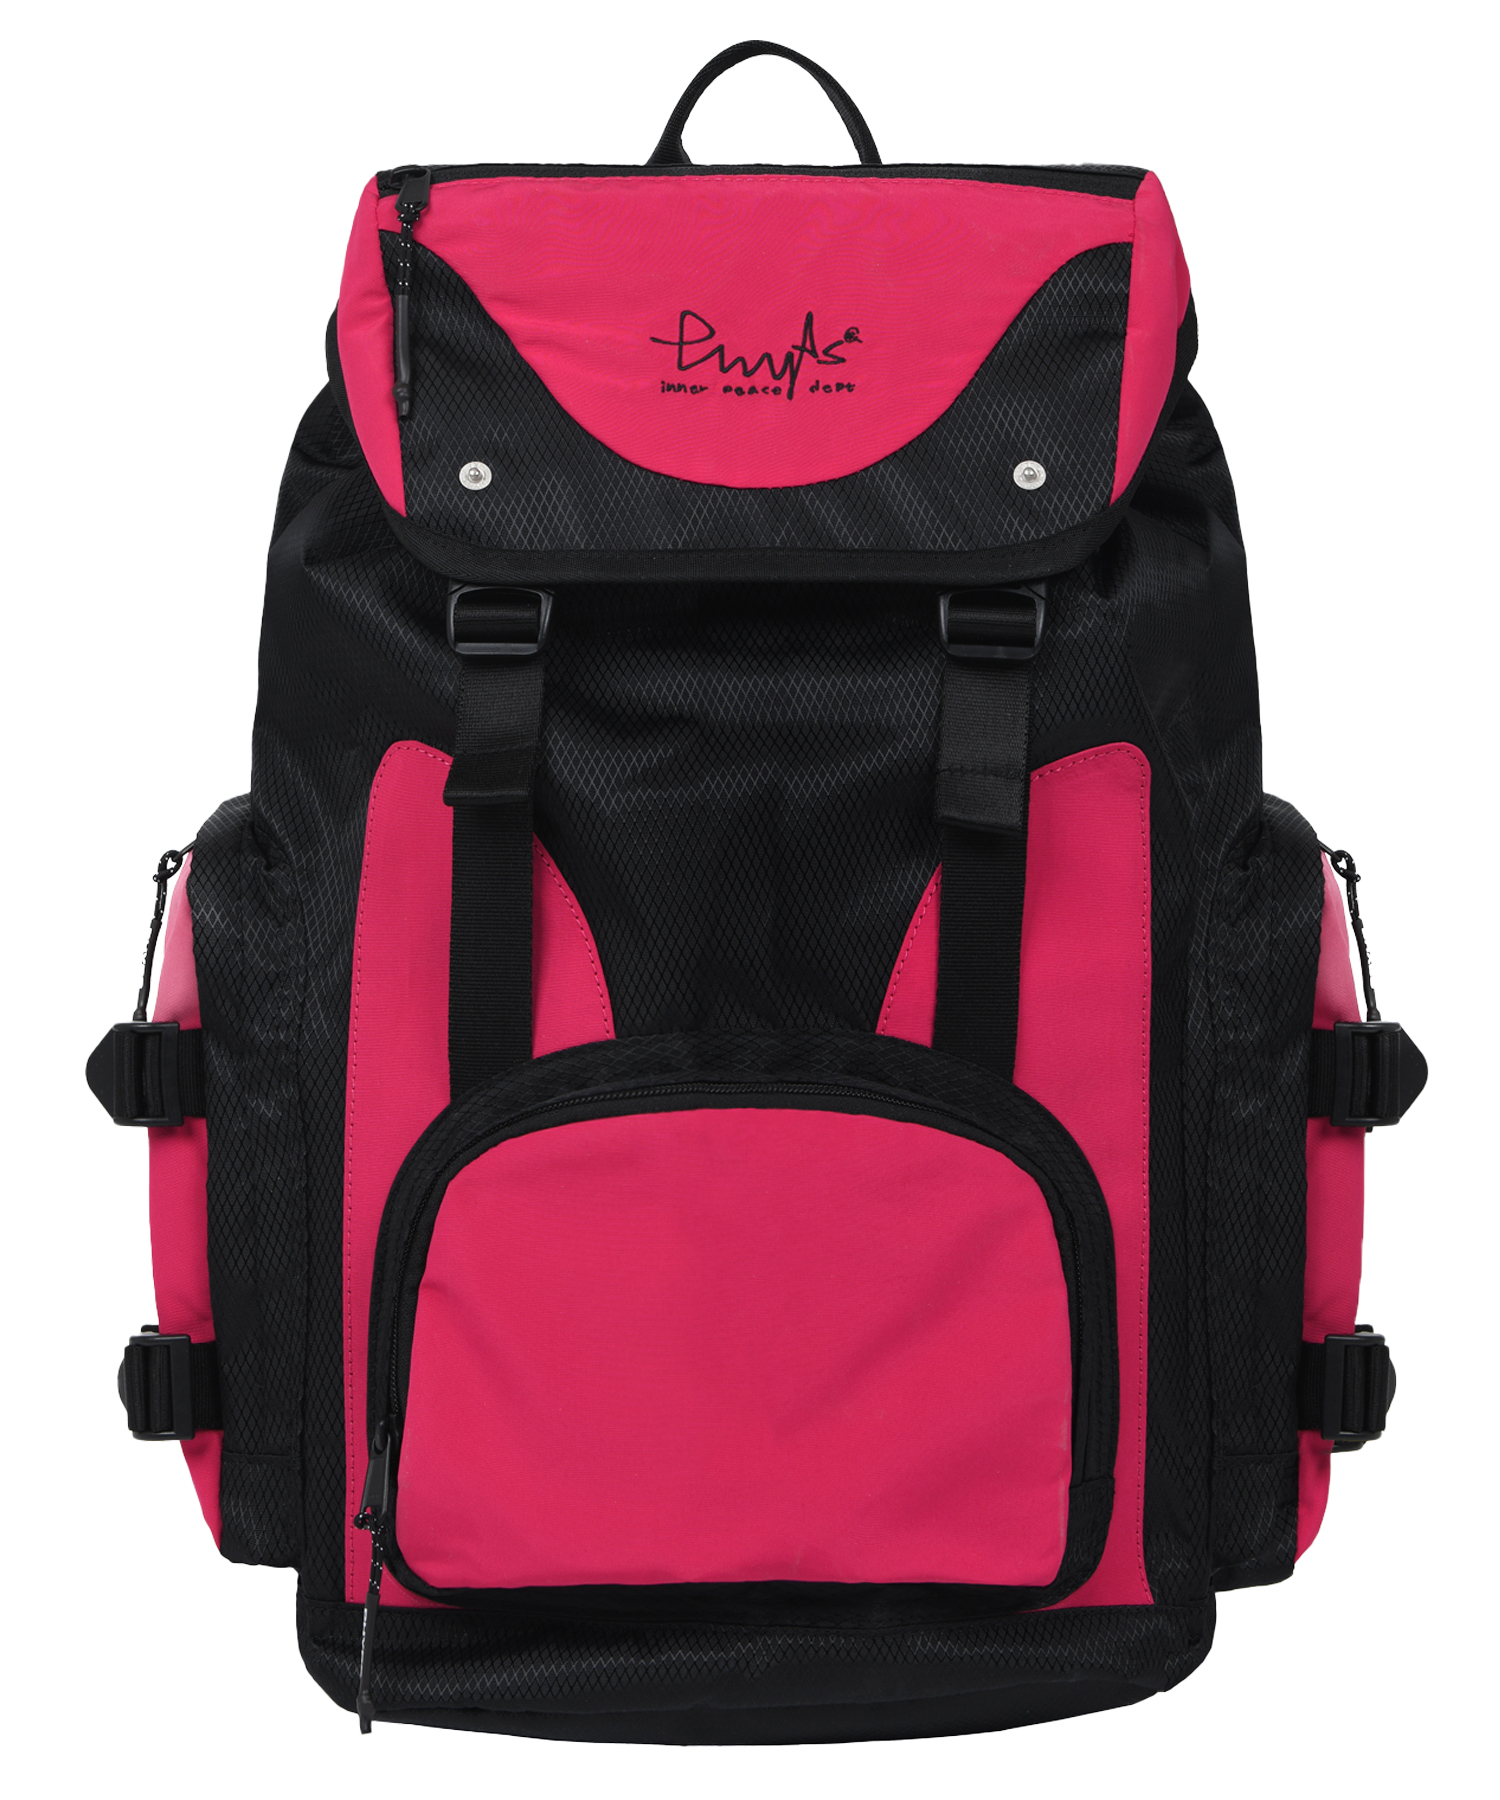 PHYPS® GO HIKED MOUTAIN BACKPACK PINK